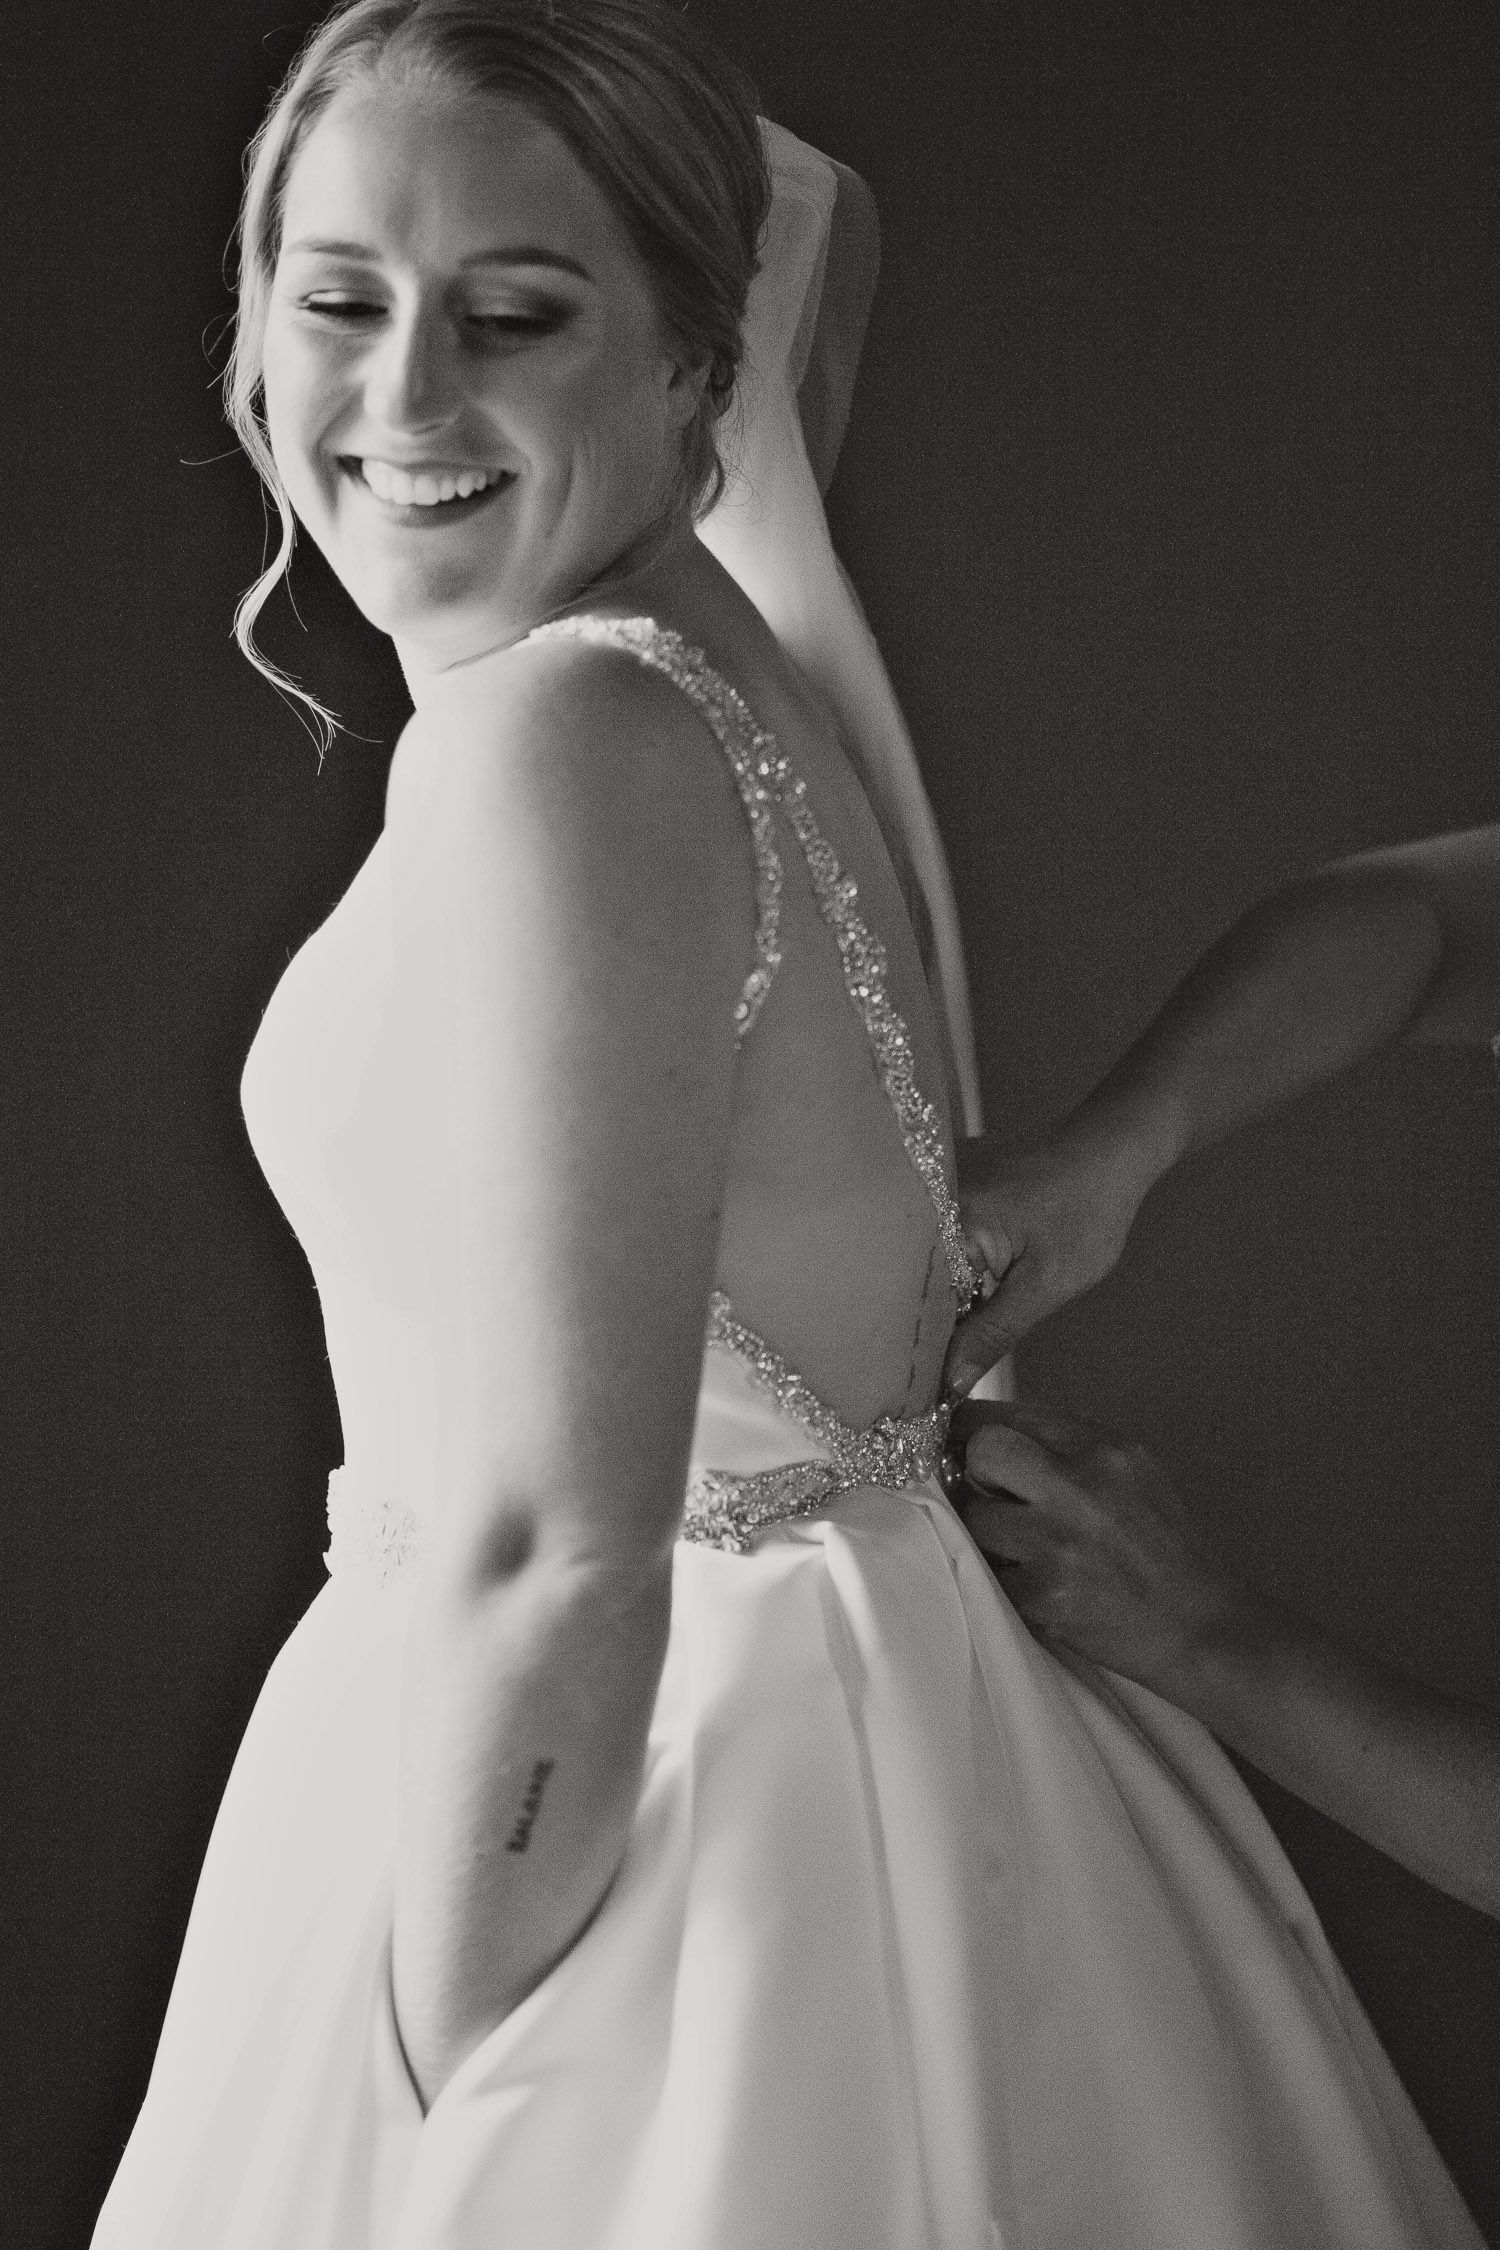 The bride gets ready for her Creekside Villa wedding captured by Tara Whittaker Photography